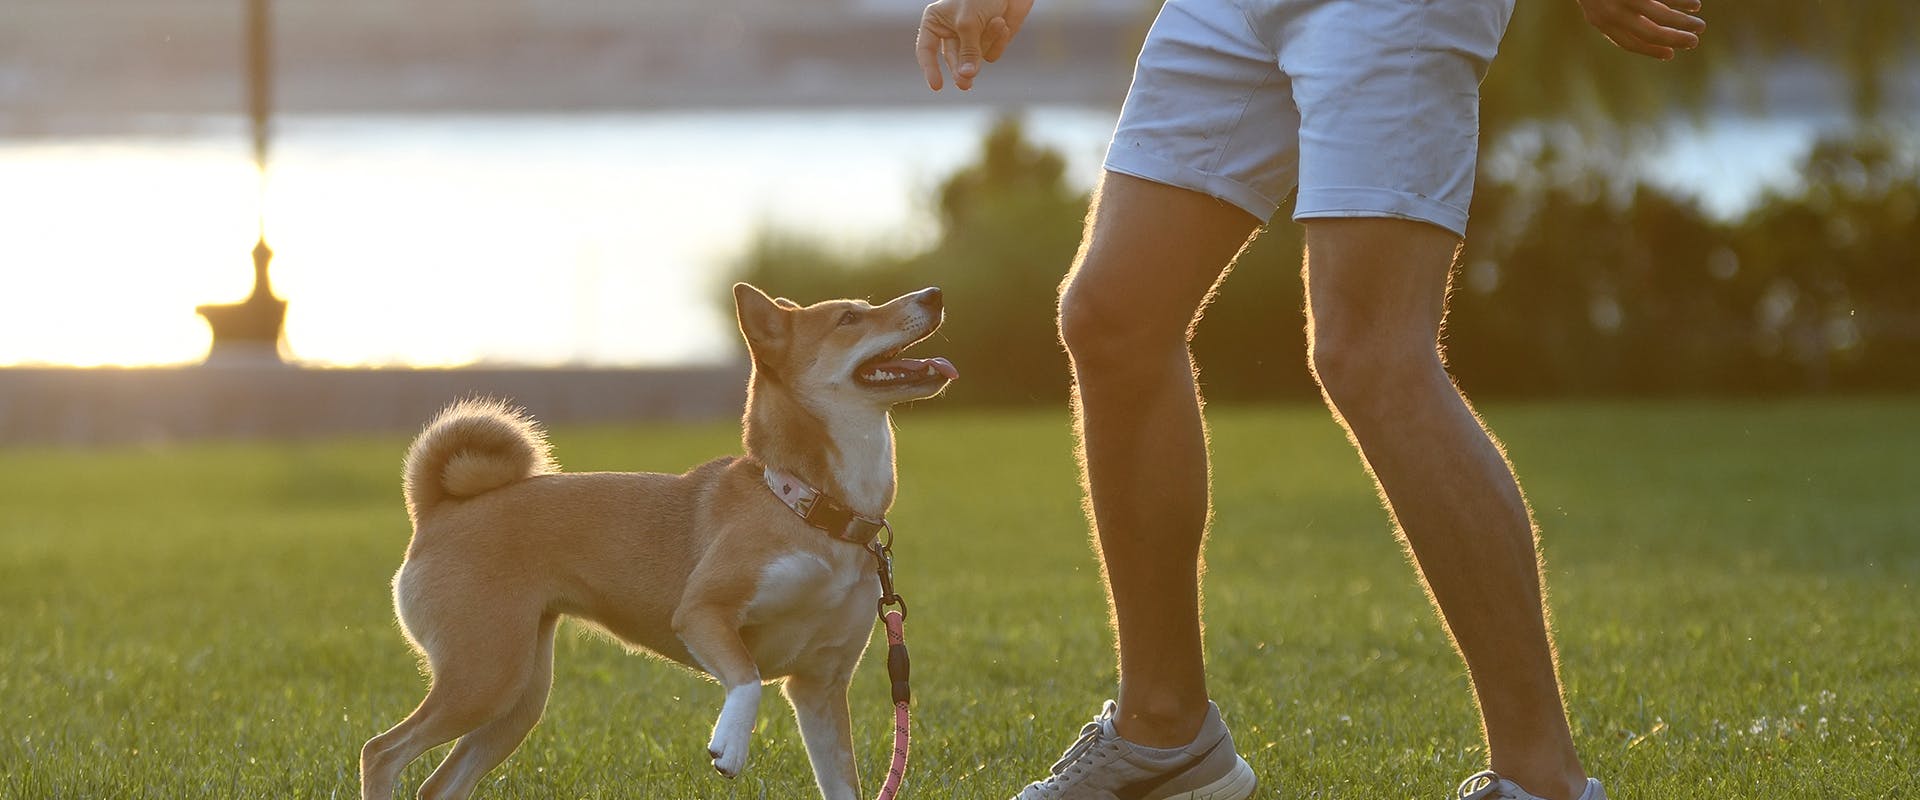 A person playing with their dog in a dog park 